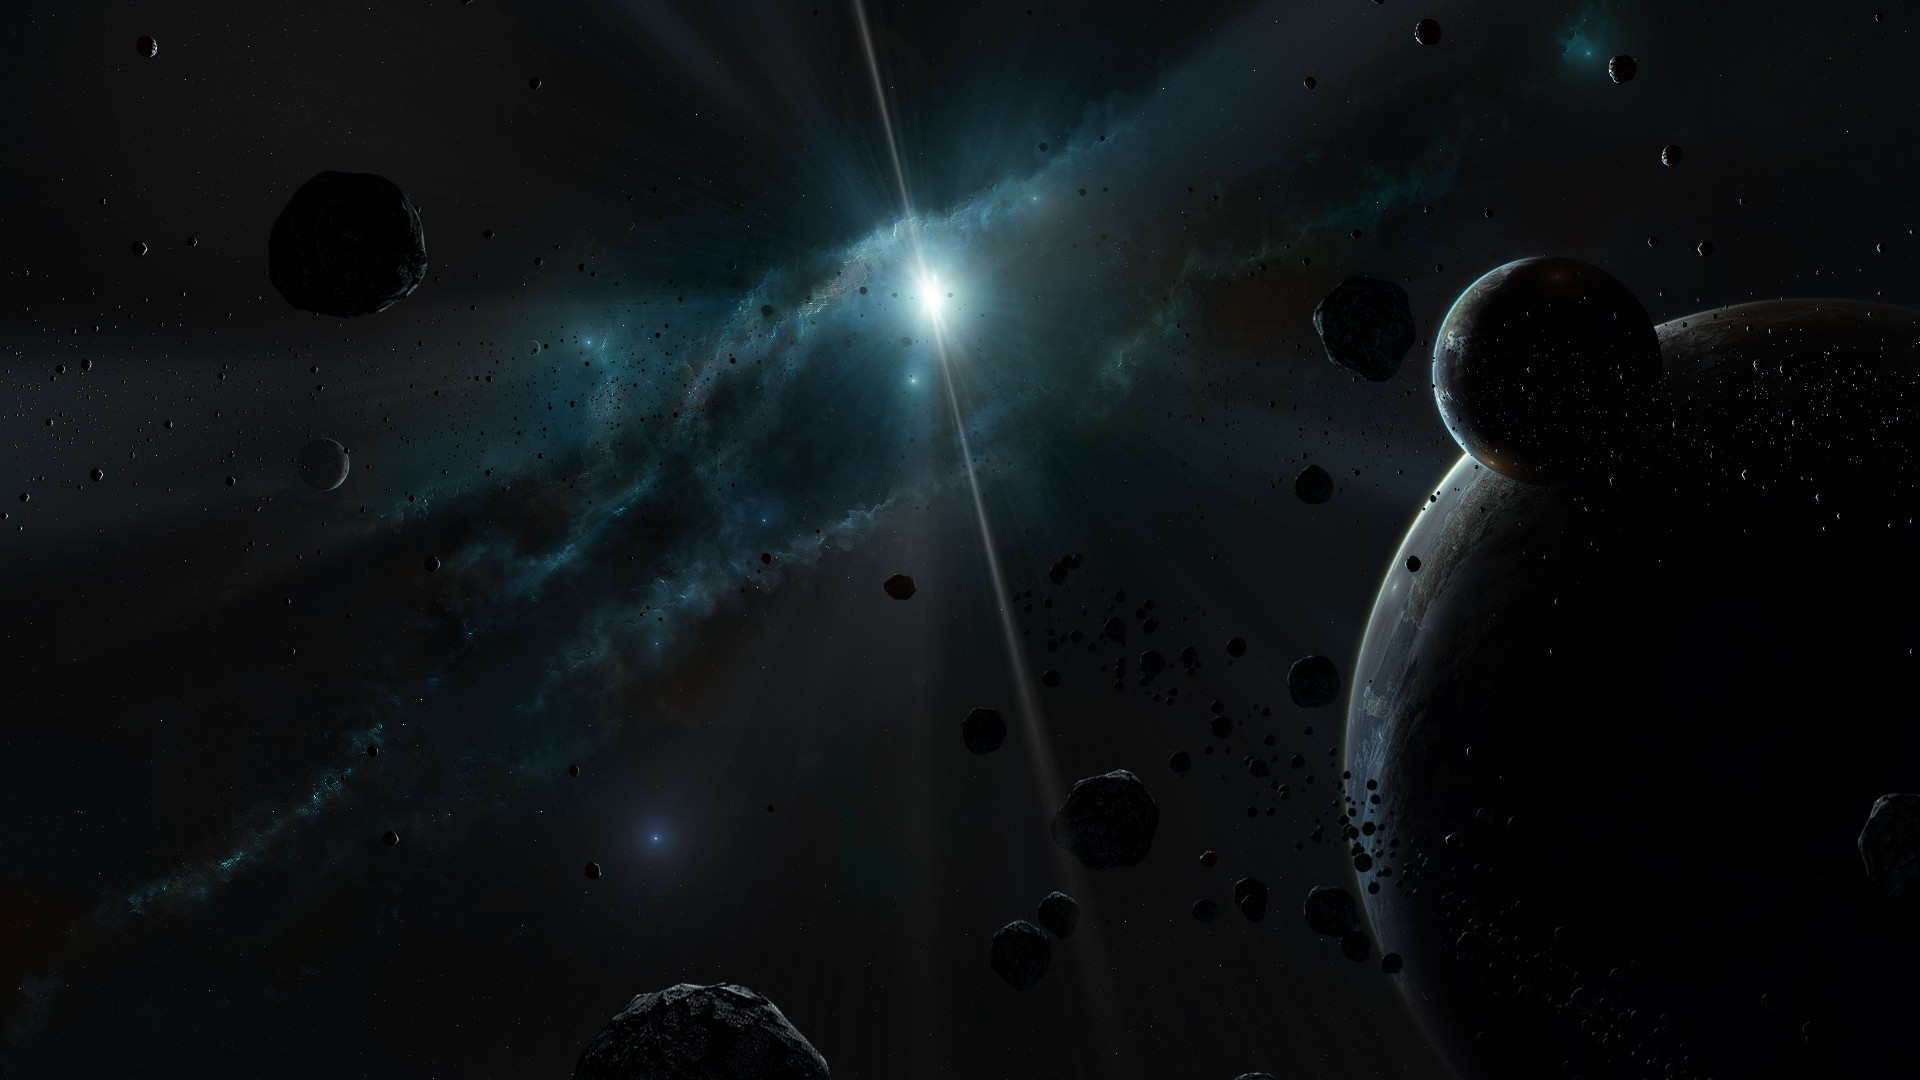 Planet Space Space Art Asteroid Lights Quasars Space Digital Art Space Art Digital Art 1920x1080